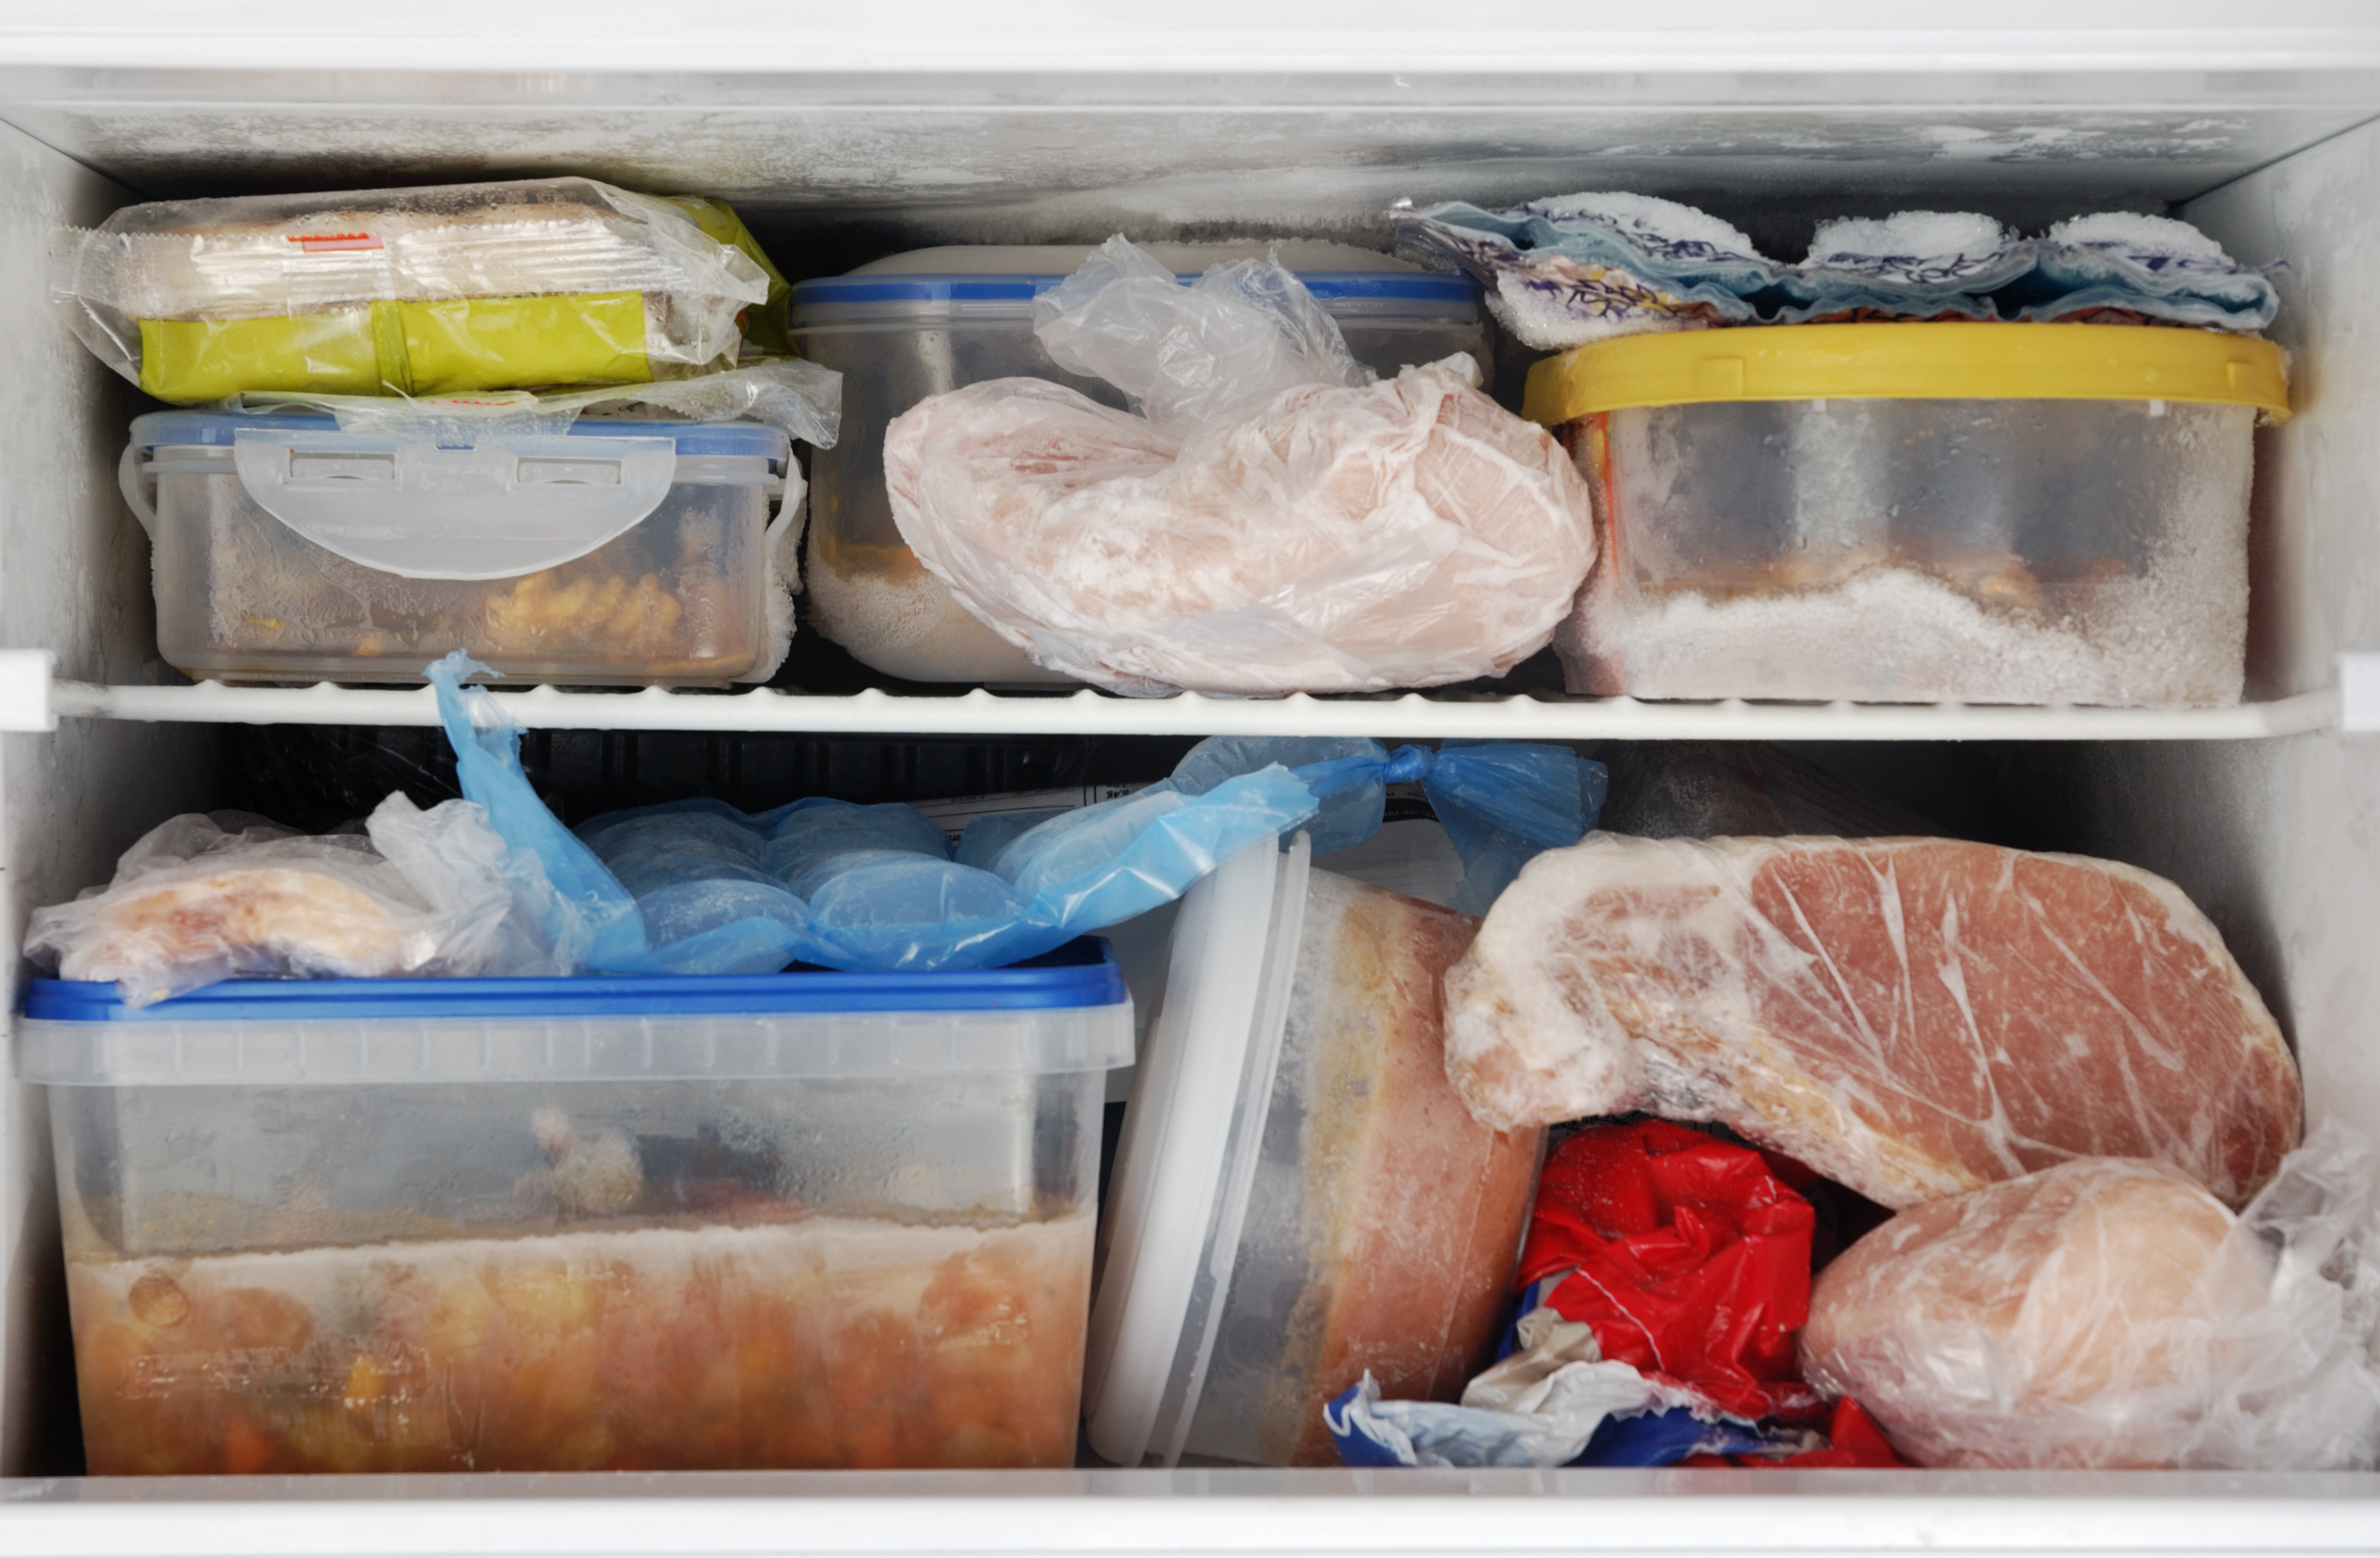 An open freezer stocked with various food items in clear plastic bags and containers, organized in shelves